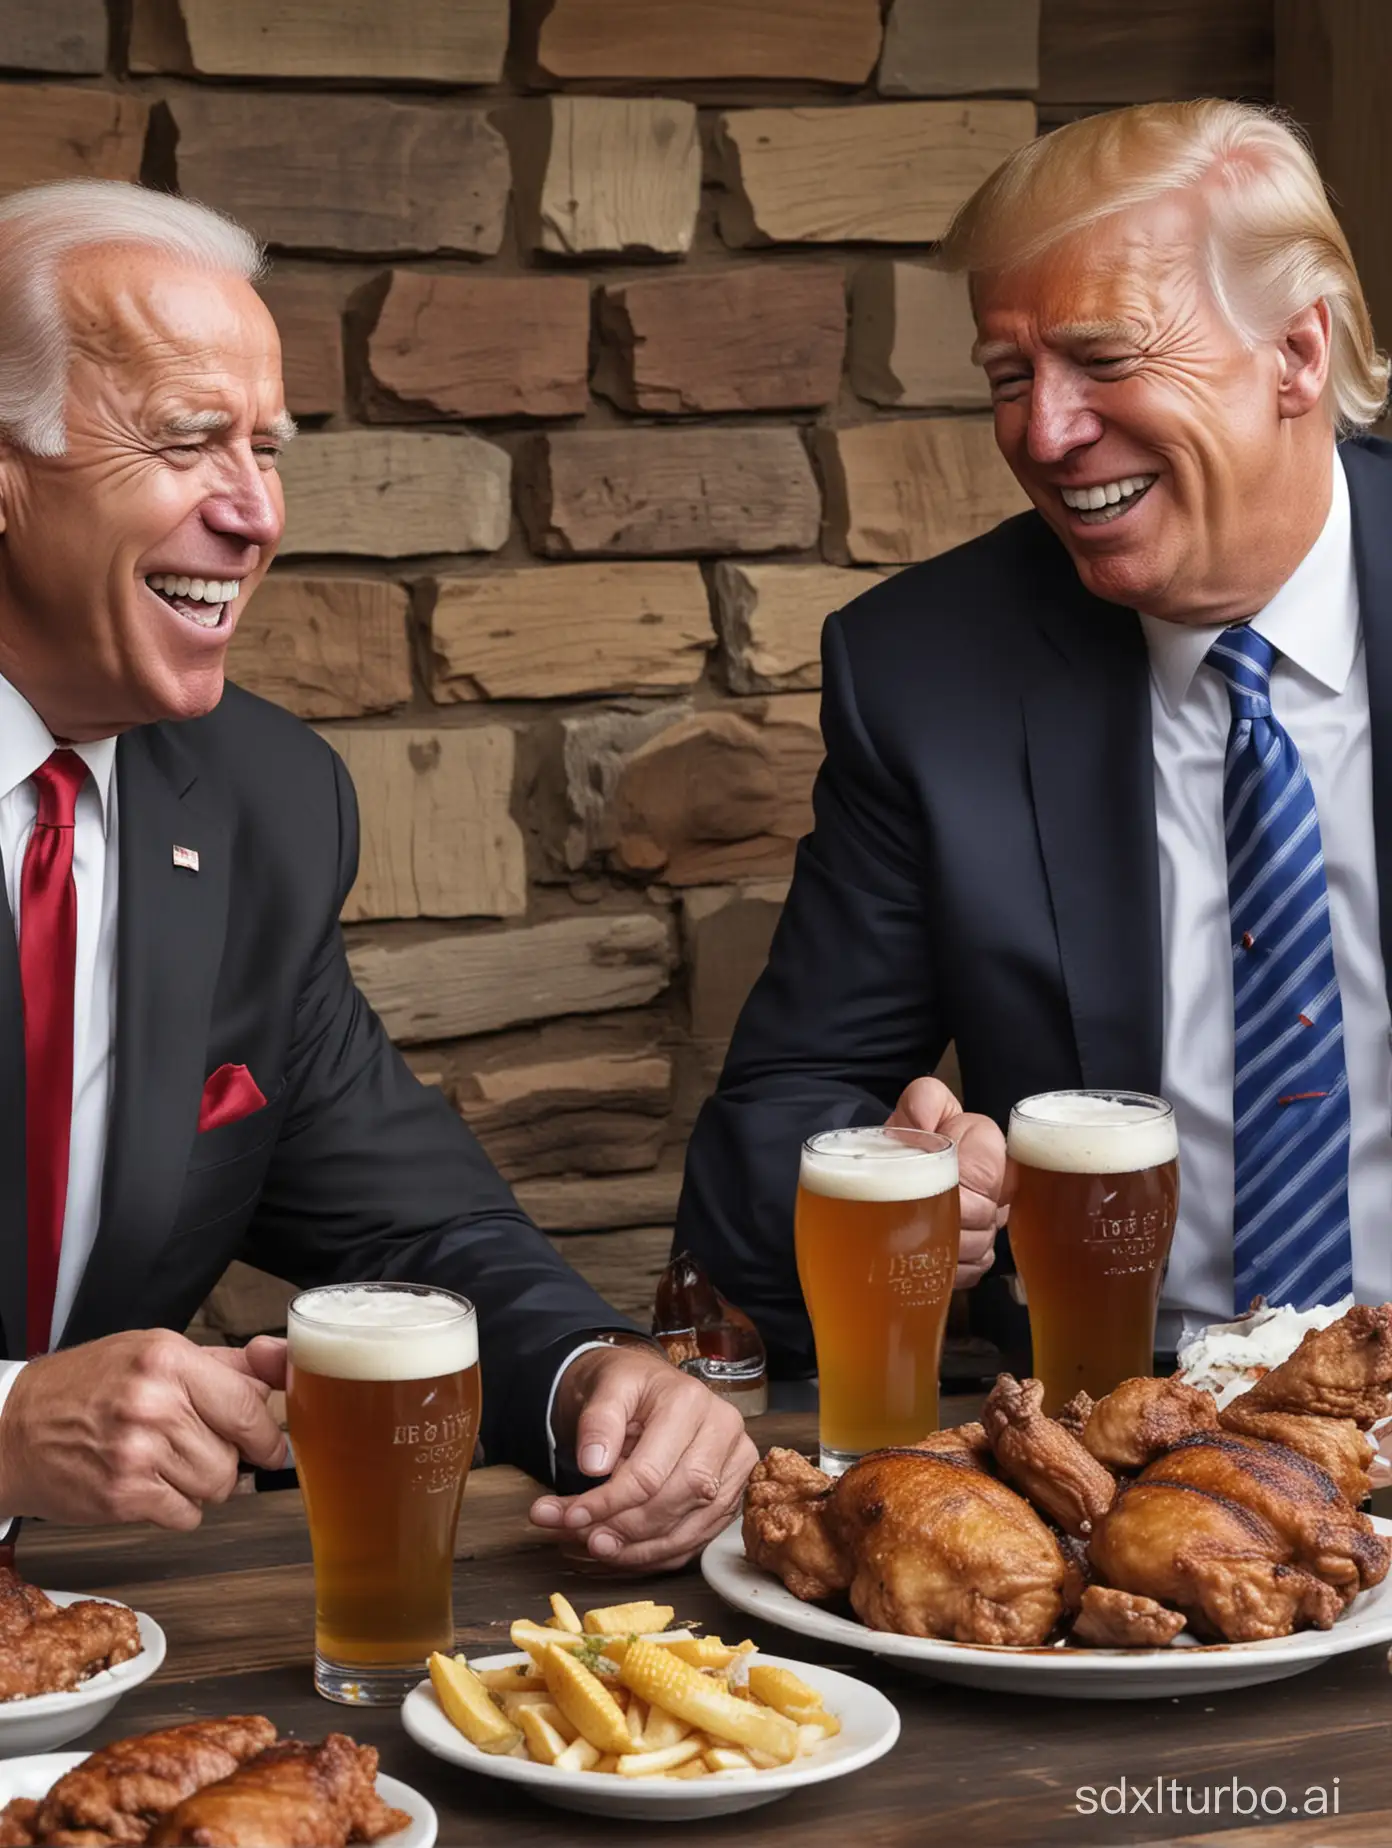 Joe Biden sitting next to a realistic Donald Trump both are laughing while sitting together drinking beer and whiskey shots at a barbeque while eating big steaks and Southern fried chicken.  Very realistic.